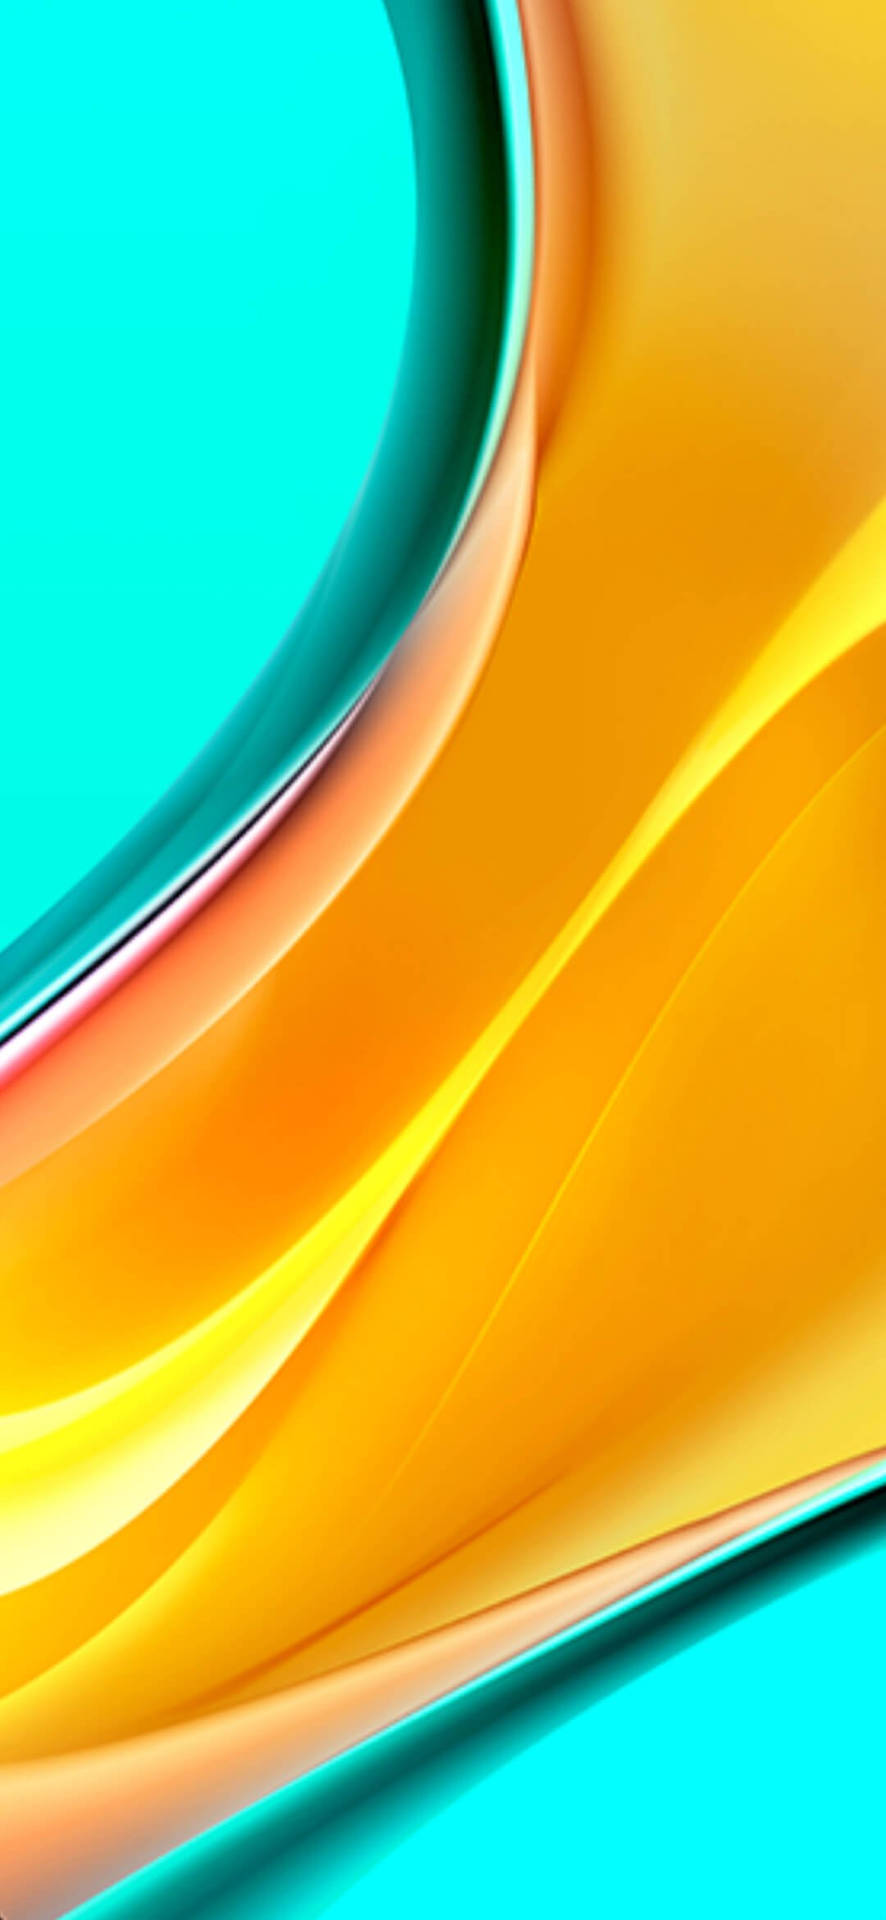 Redmi 9 Yellow And Bright Blue Background